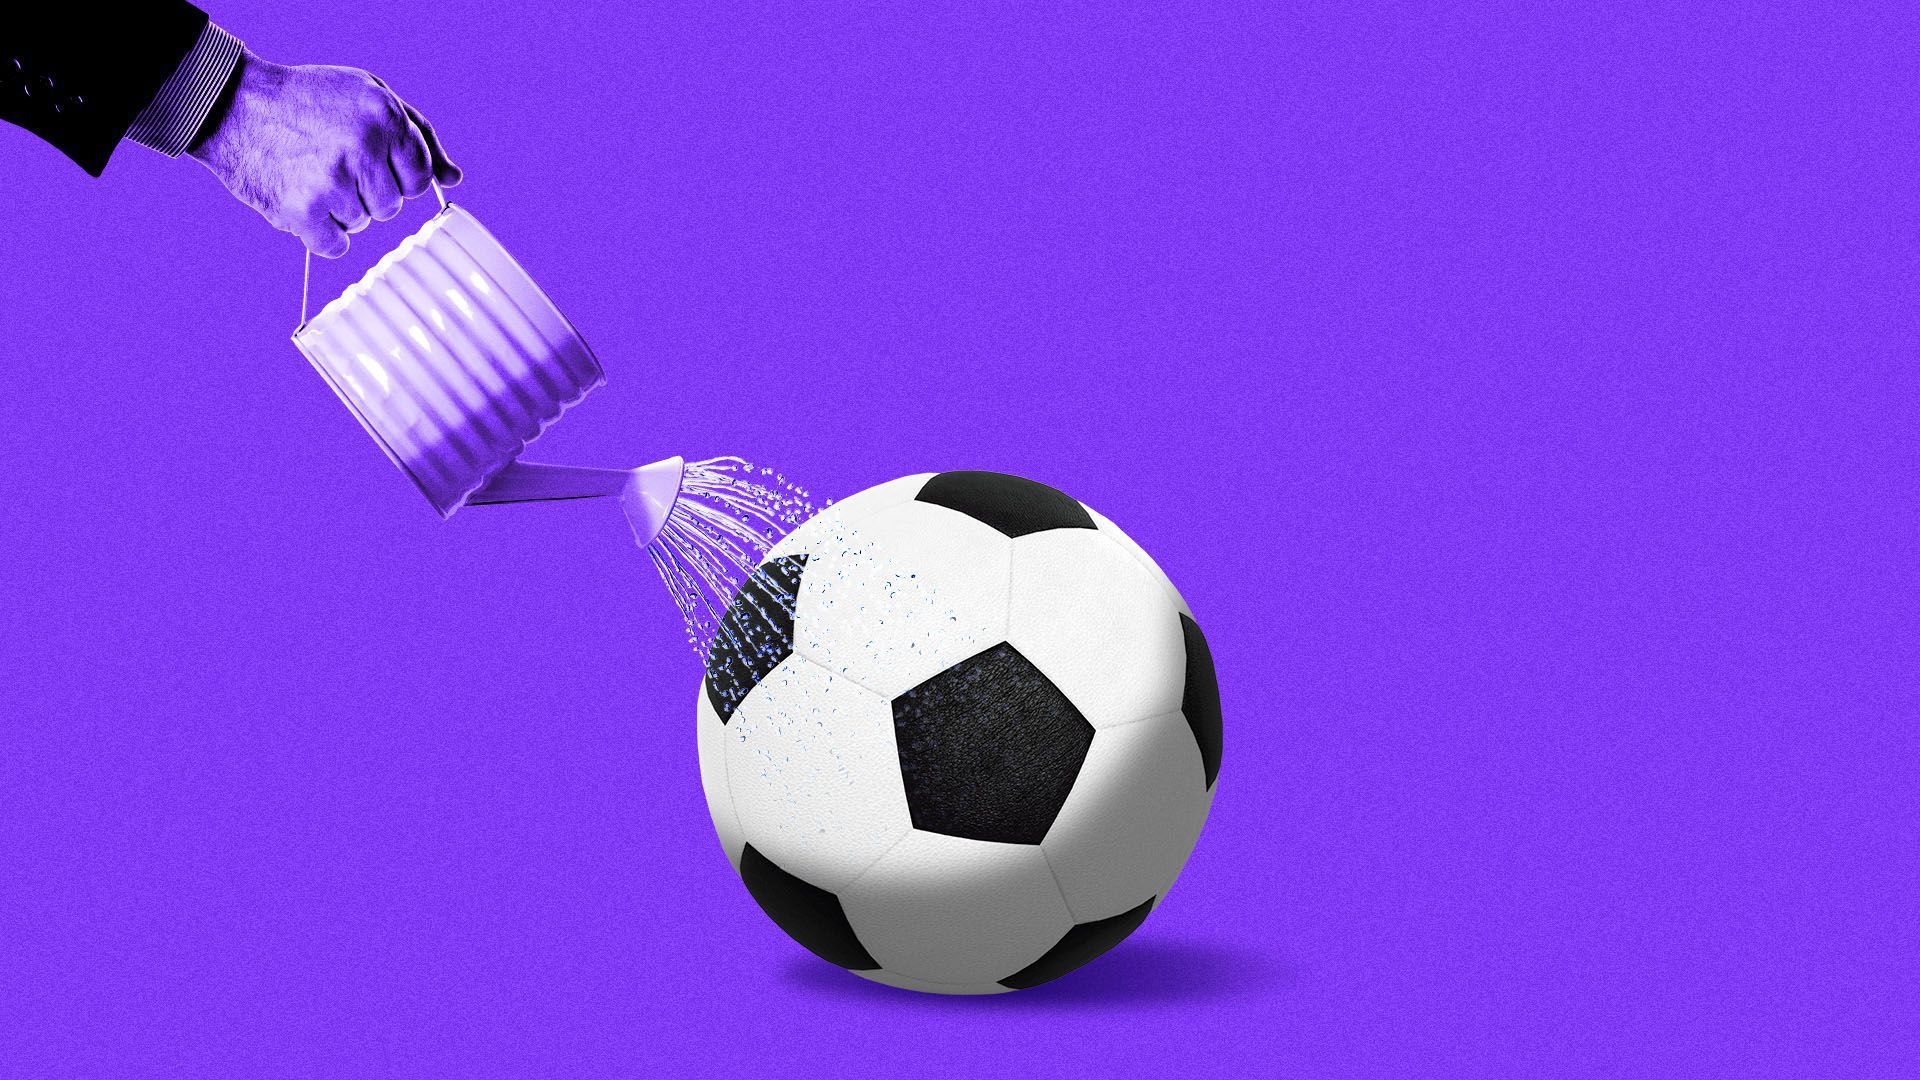 an illustration of a soccer ball being watered like a plant